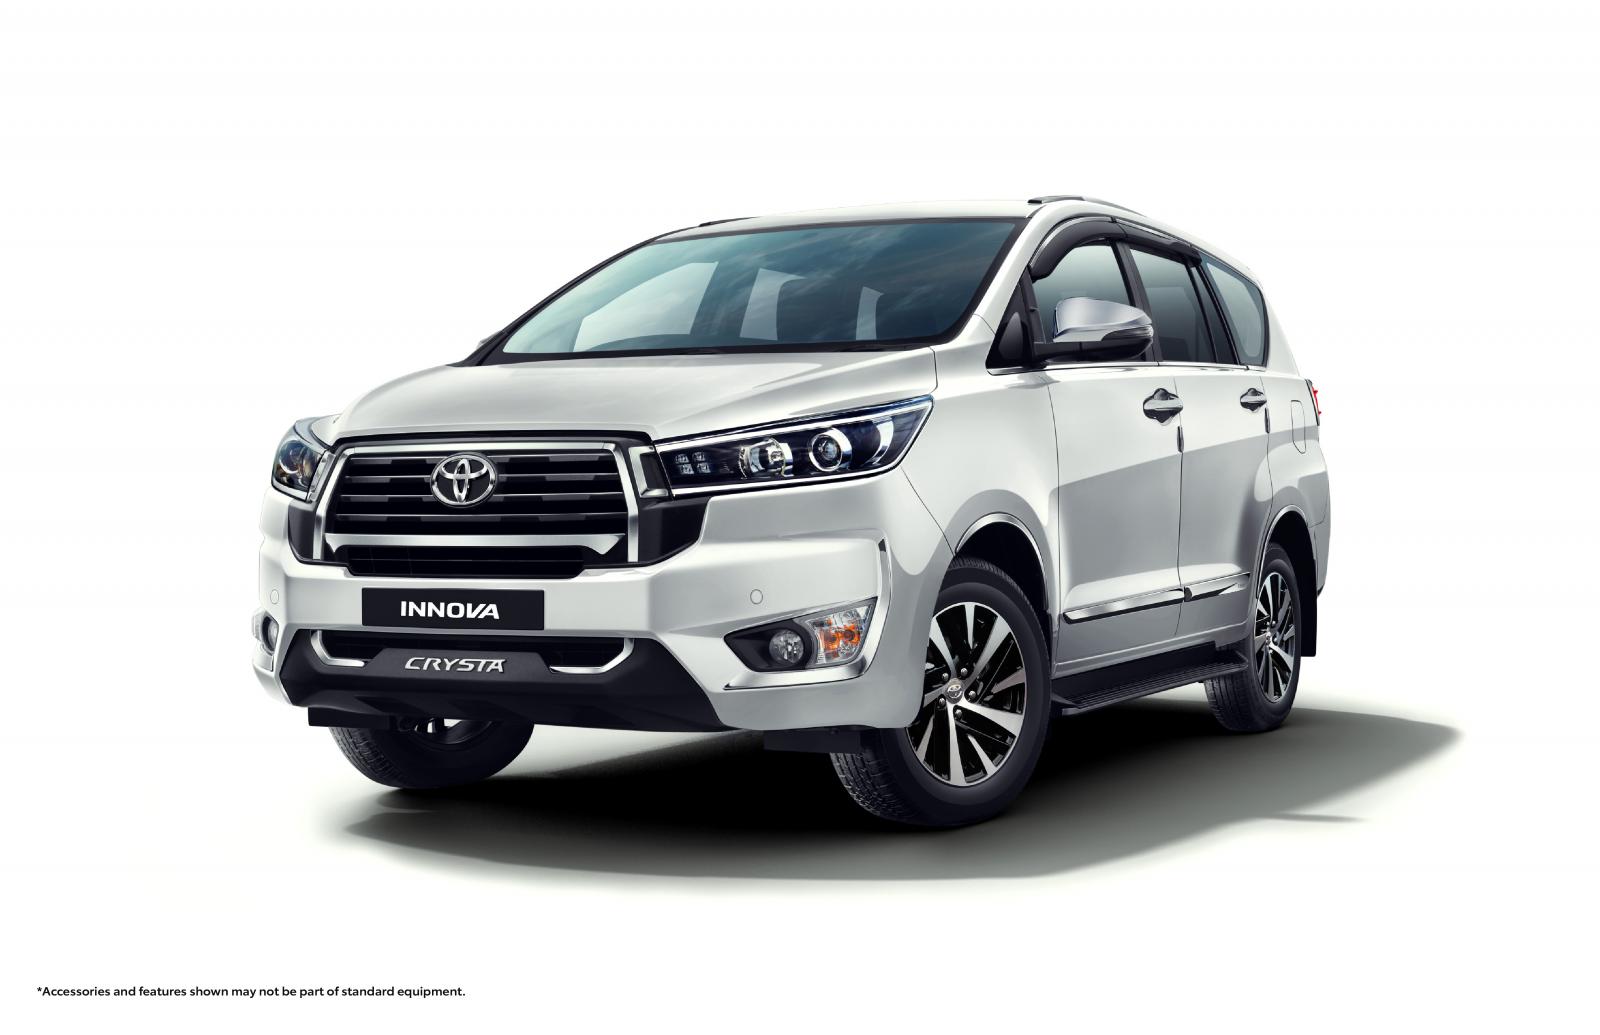 New Toyota Innova Crysta Zx And Vx Variant Prices Announced